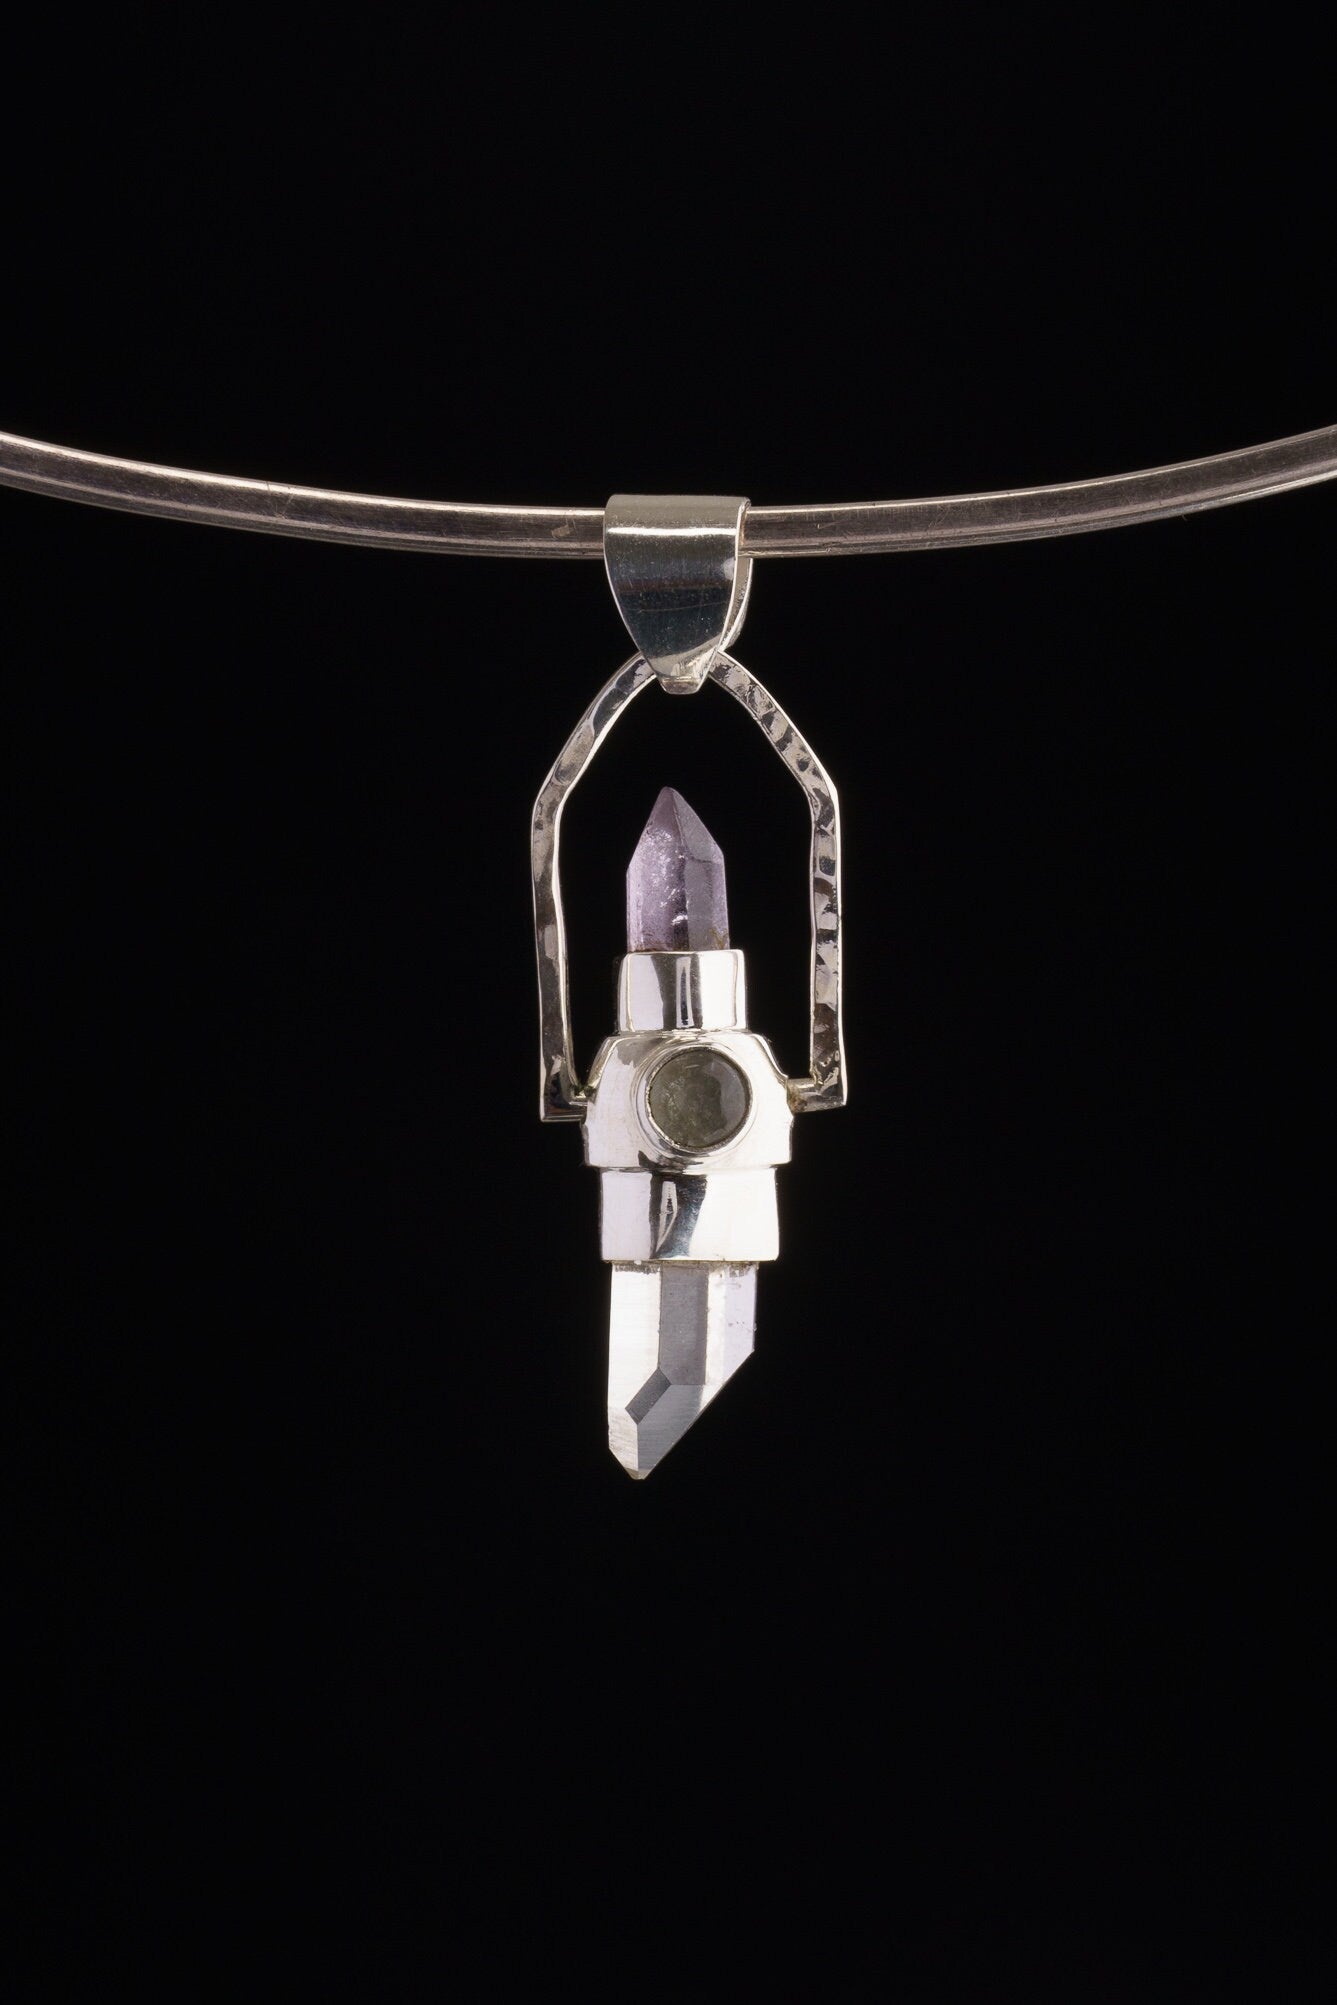 Himalayan Quartz & Amethyst Point with a Aquamarine, Labradorite and Apatite - Sterling Silver Set - Spinning Crystal Pendant